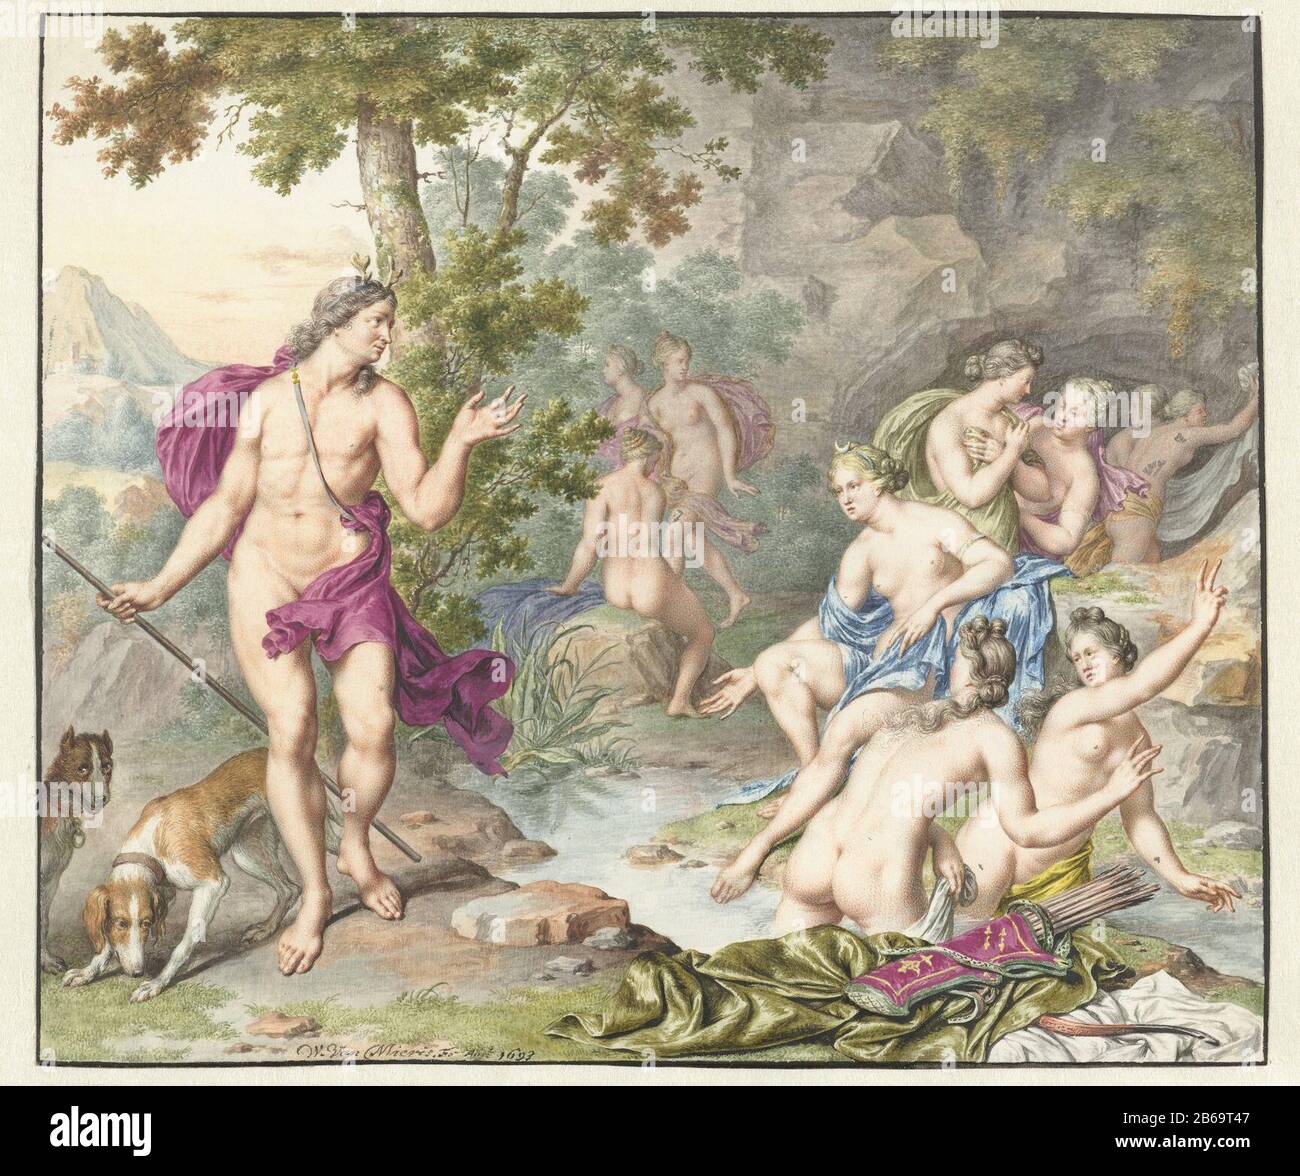 Actaeon surprised Diana and her companions Actaeon surprised Diana and her companions object type: Drawing Object number: RP-T 1919-52 Manufacturer : artist: Willem van Mieris Date: Dec 9 1693 Physical features: brush in watercolor and body color, gouache on parchment material: parchment finish coating watercolor gouache (water) Measurements: h 175 mm × W 205 mm Subject: Actaeon changed into a tag: as punishment for seeing re bathe, Diana changes Actaeon, the hunter, into a tag (Ovid, Metamorphoses III 193) Stock Photo